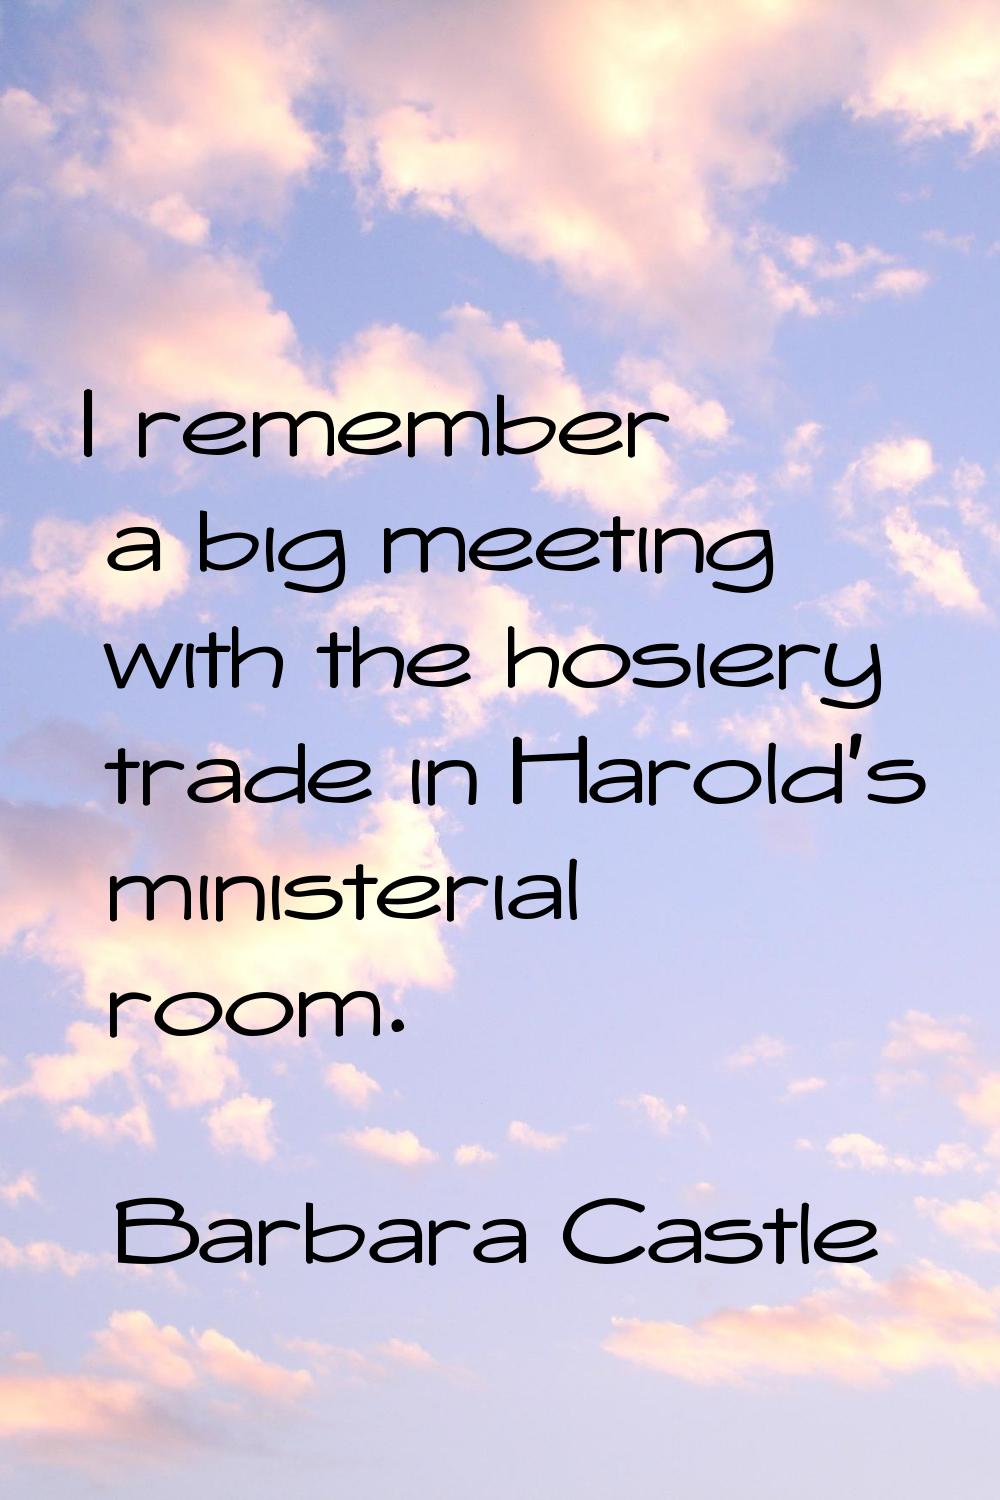 I remember a big meeting with the hosiery trade in Harold's ministerial room.